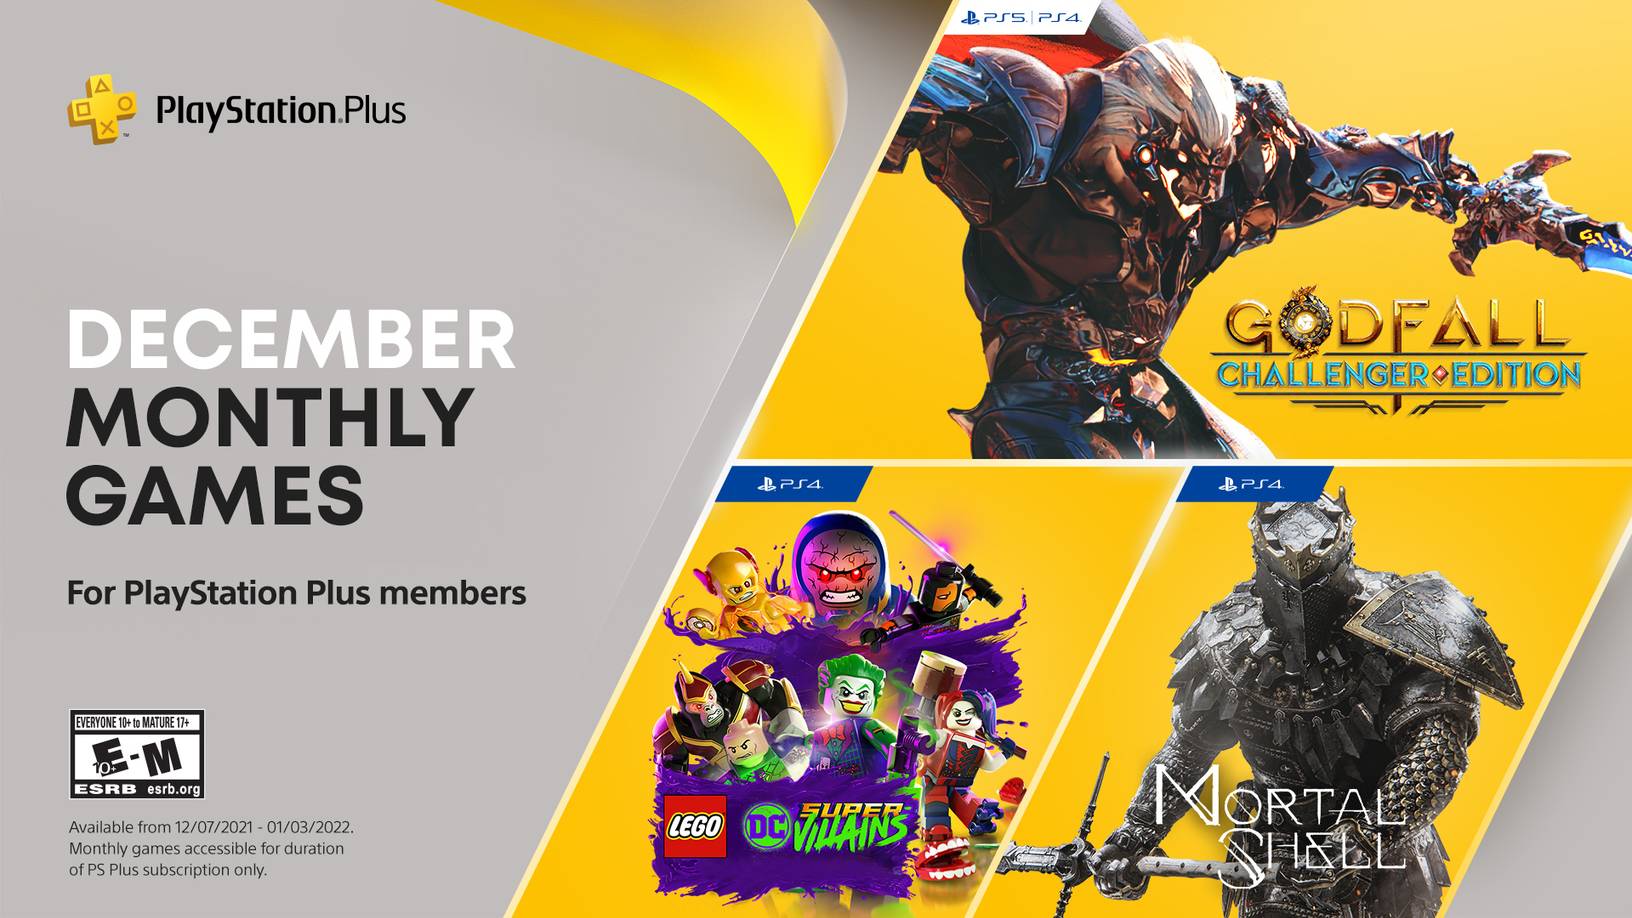 PlayStation Plus games for December Godfall Challenger Edition, Lego